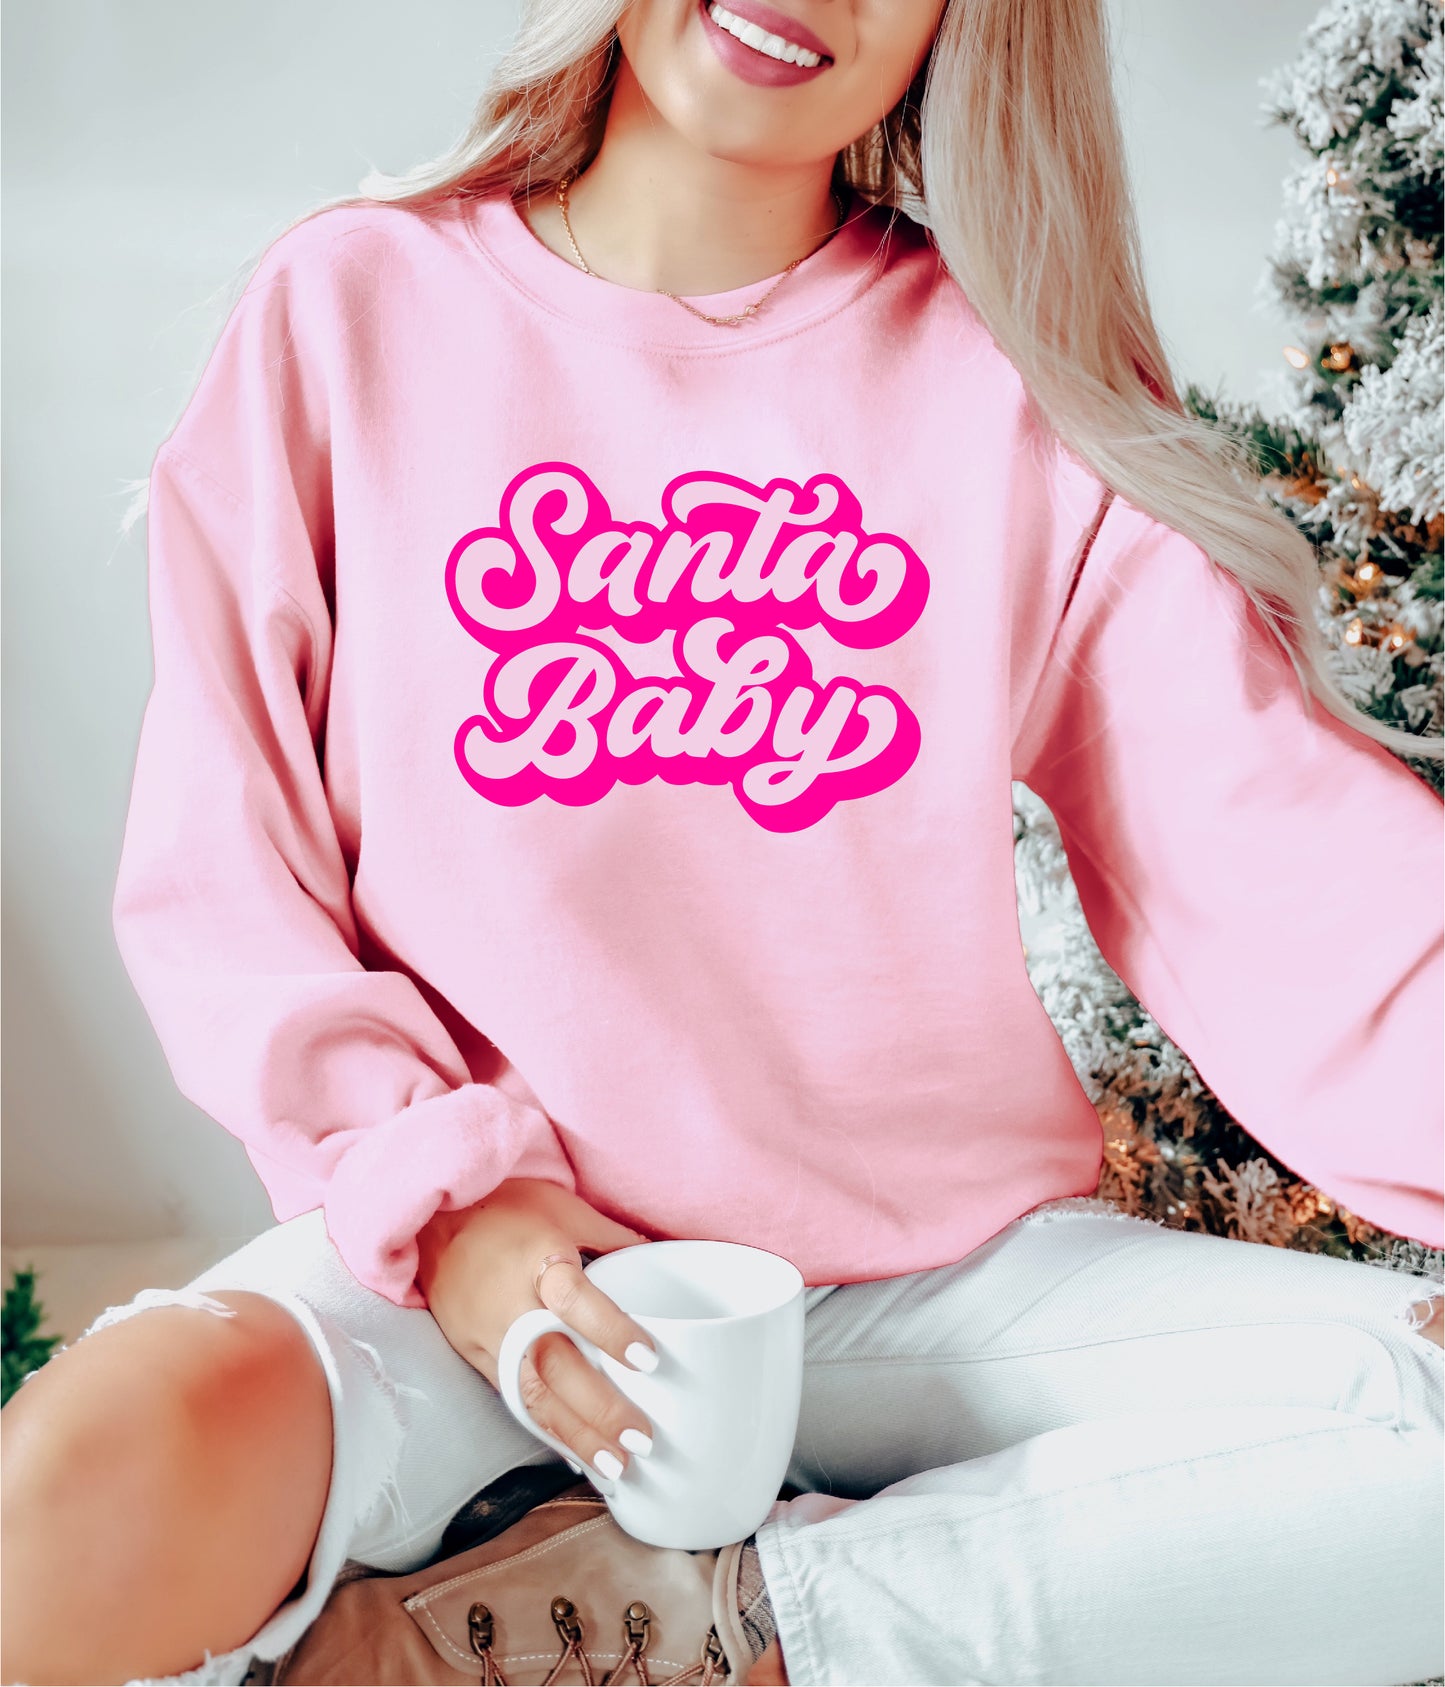 SANTA BABY SWEATER <br> More colors available